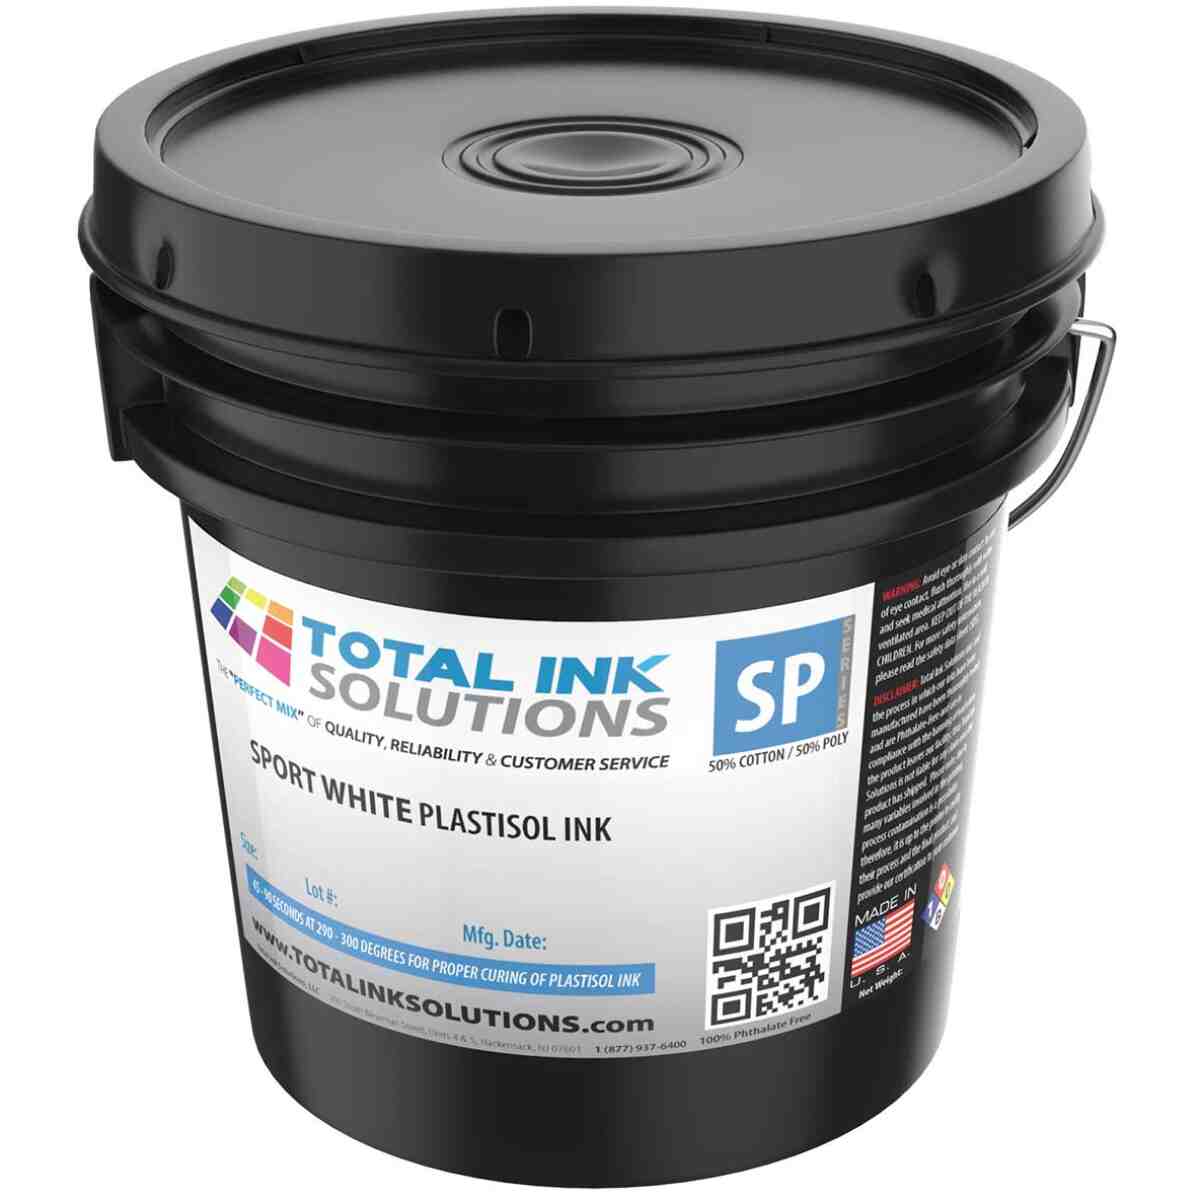 Sport White Plastisol Ink - Gallon TOTAL INK SOLUTIONS®